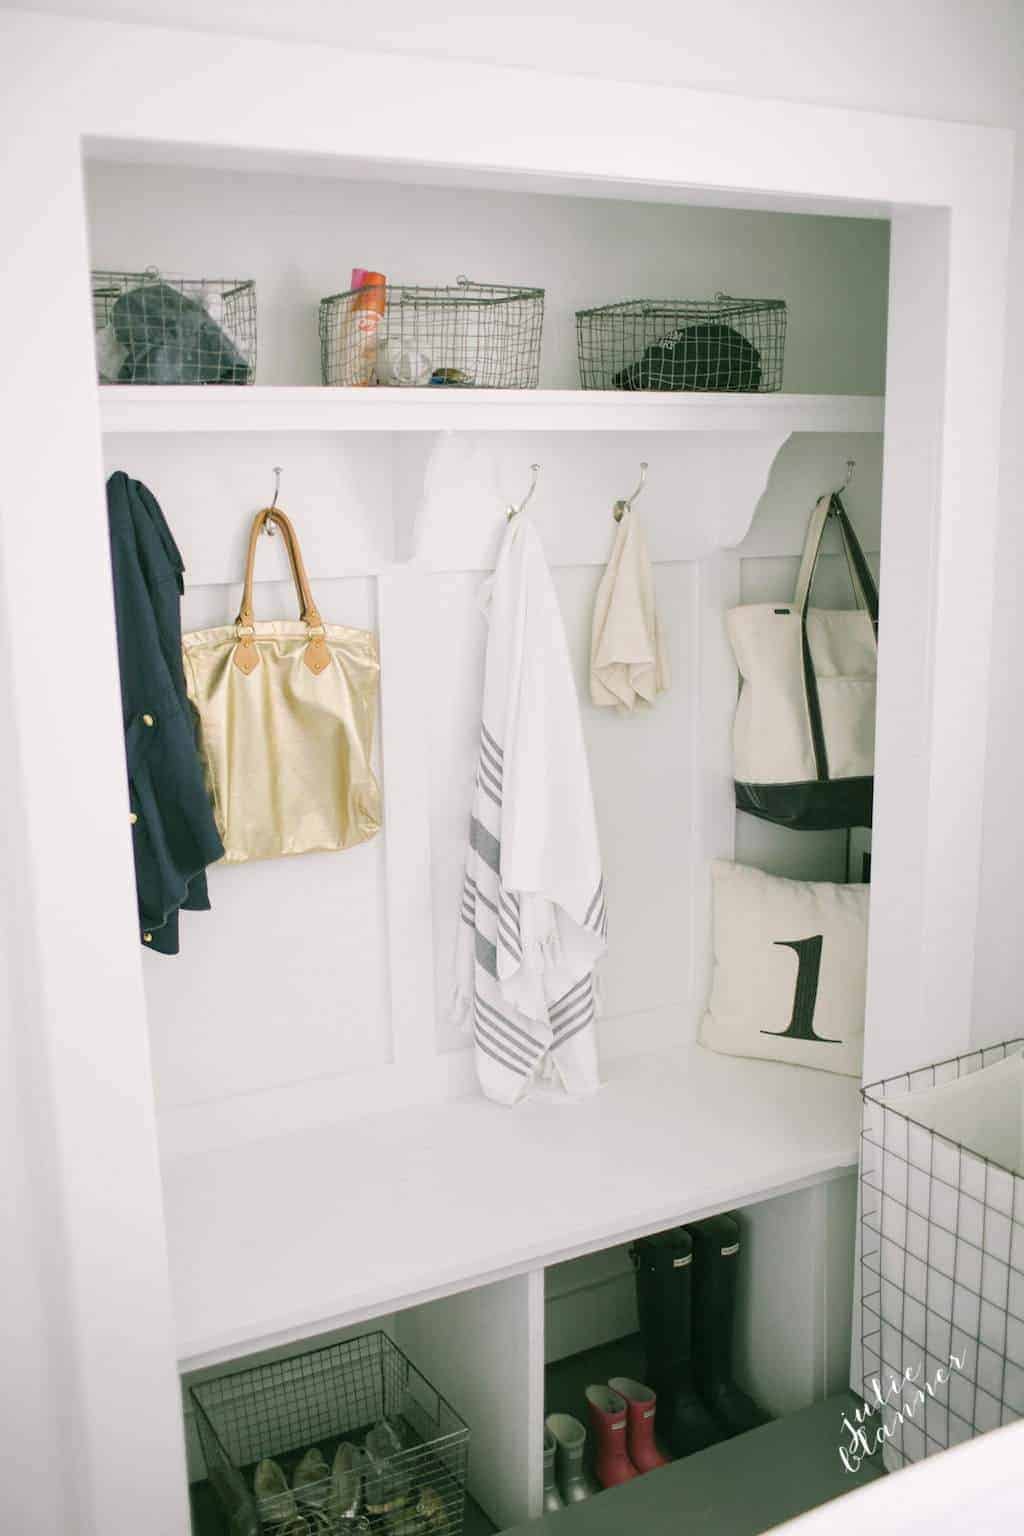 A closet mudroom with shelves, baskets, hooks and bemch.